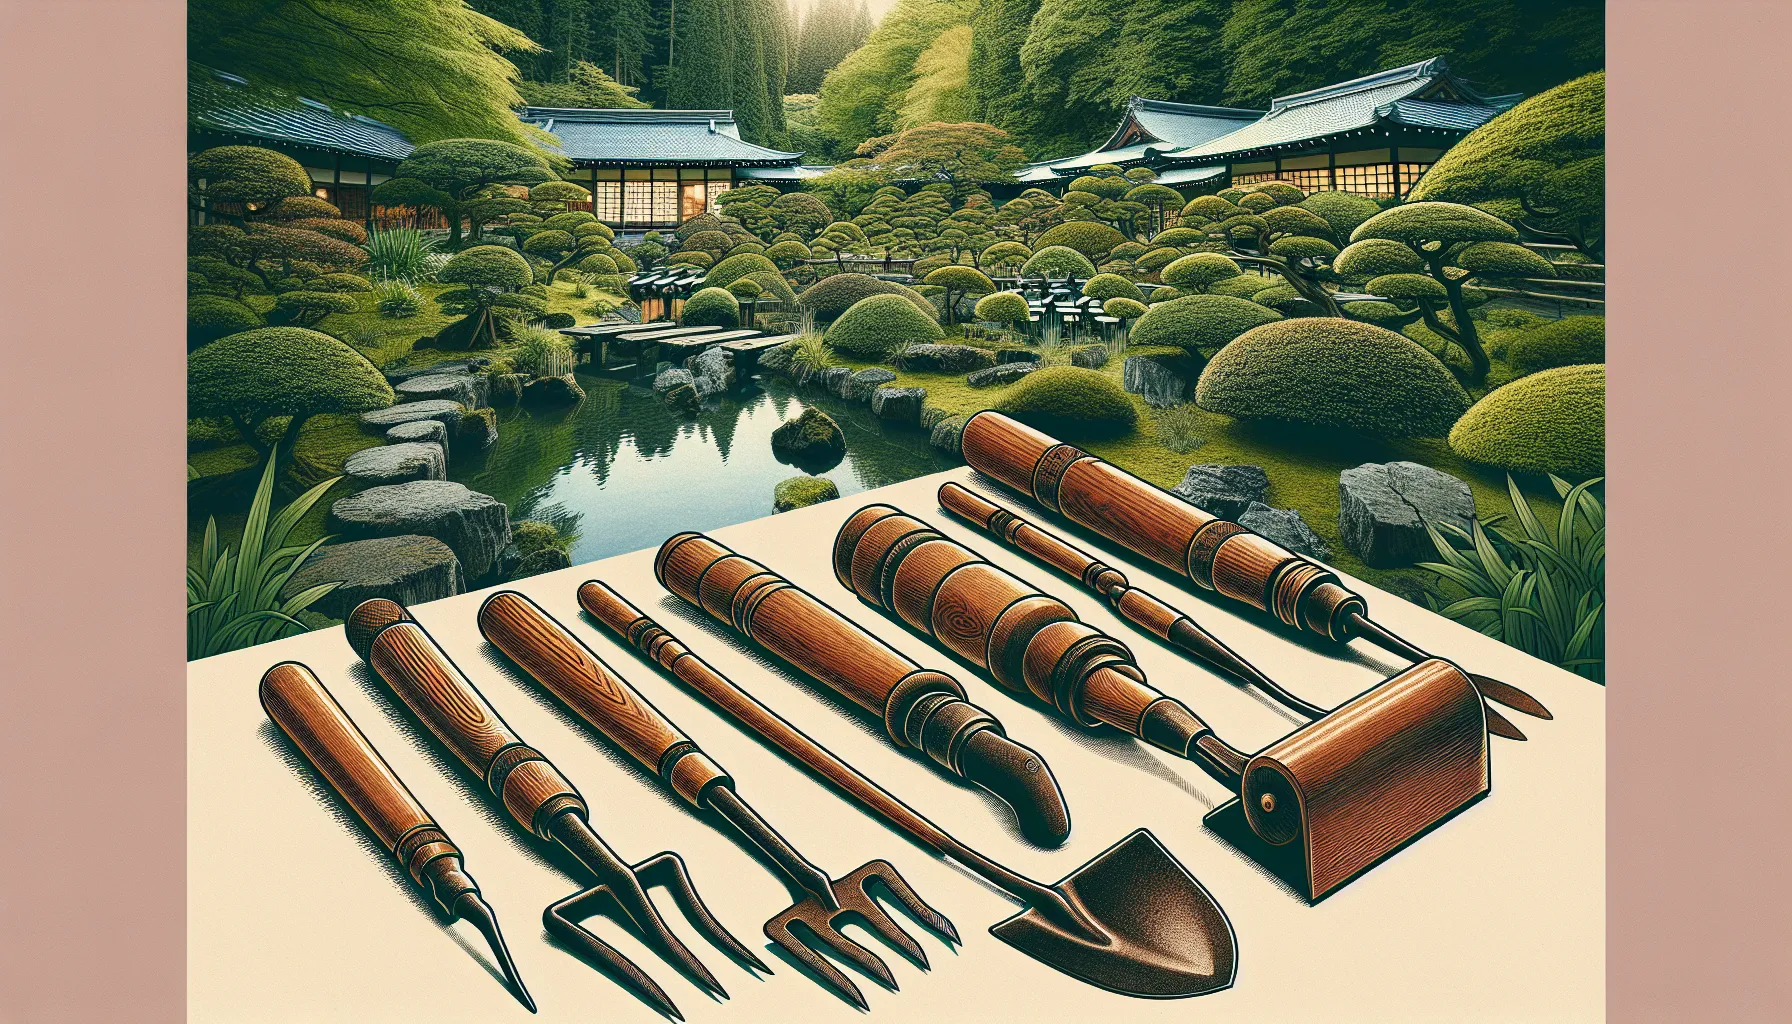 Traditional Japan garden tools are prominently displayed in the foreground with a meticulously maintained Japanese garden and buildings in the background.